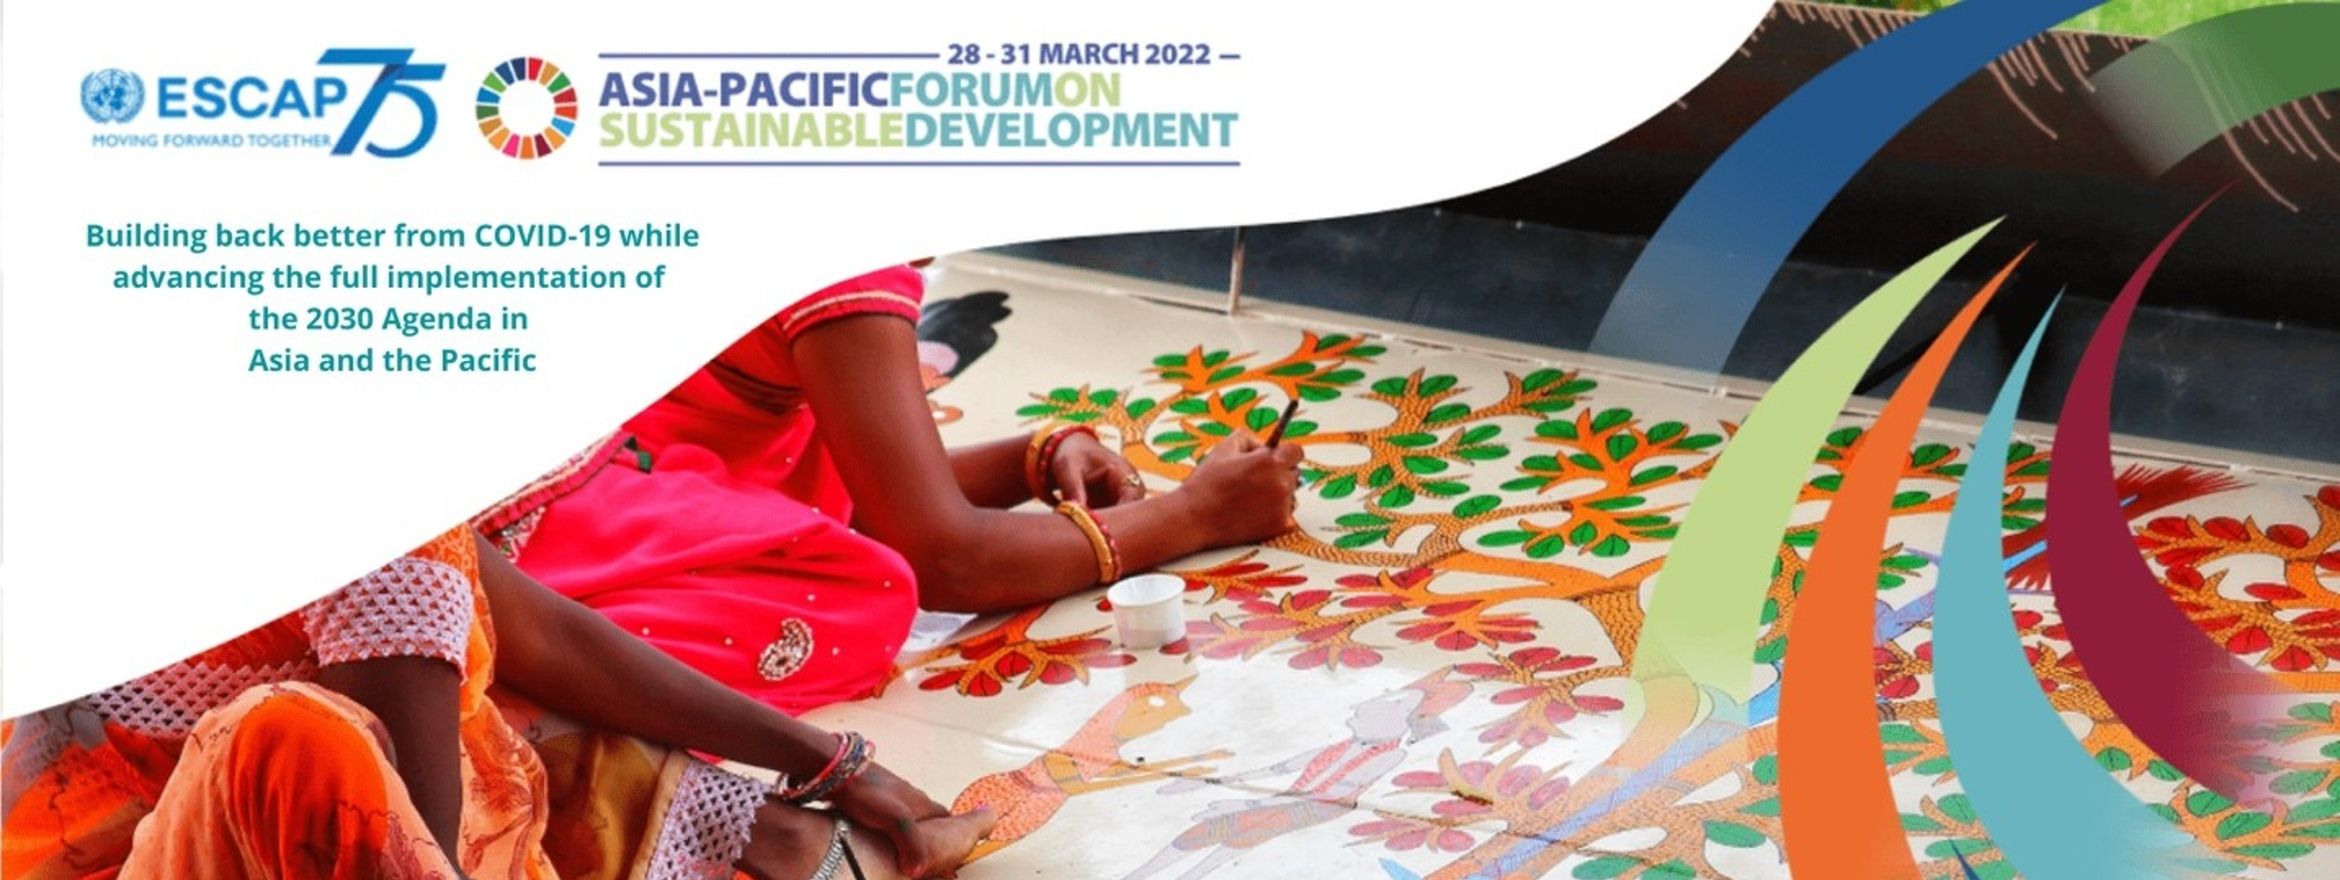 UNESCO contributes to 9th Asia-Pacific Forum on Sustainable Development 2022 (APFSD), 28 – 31 March 2022